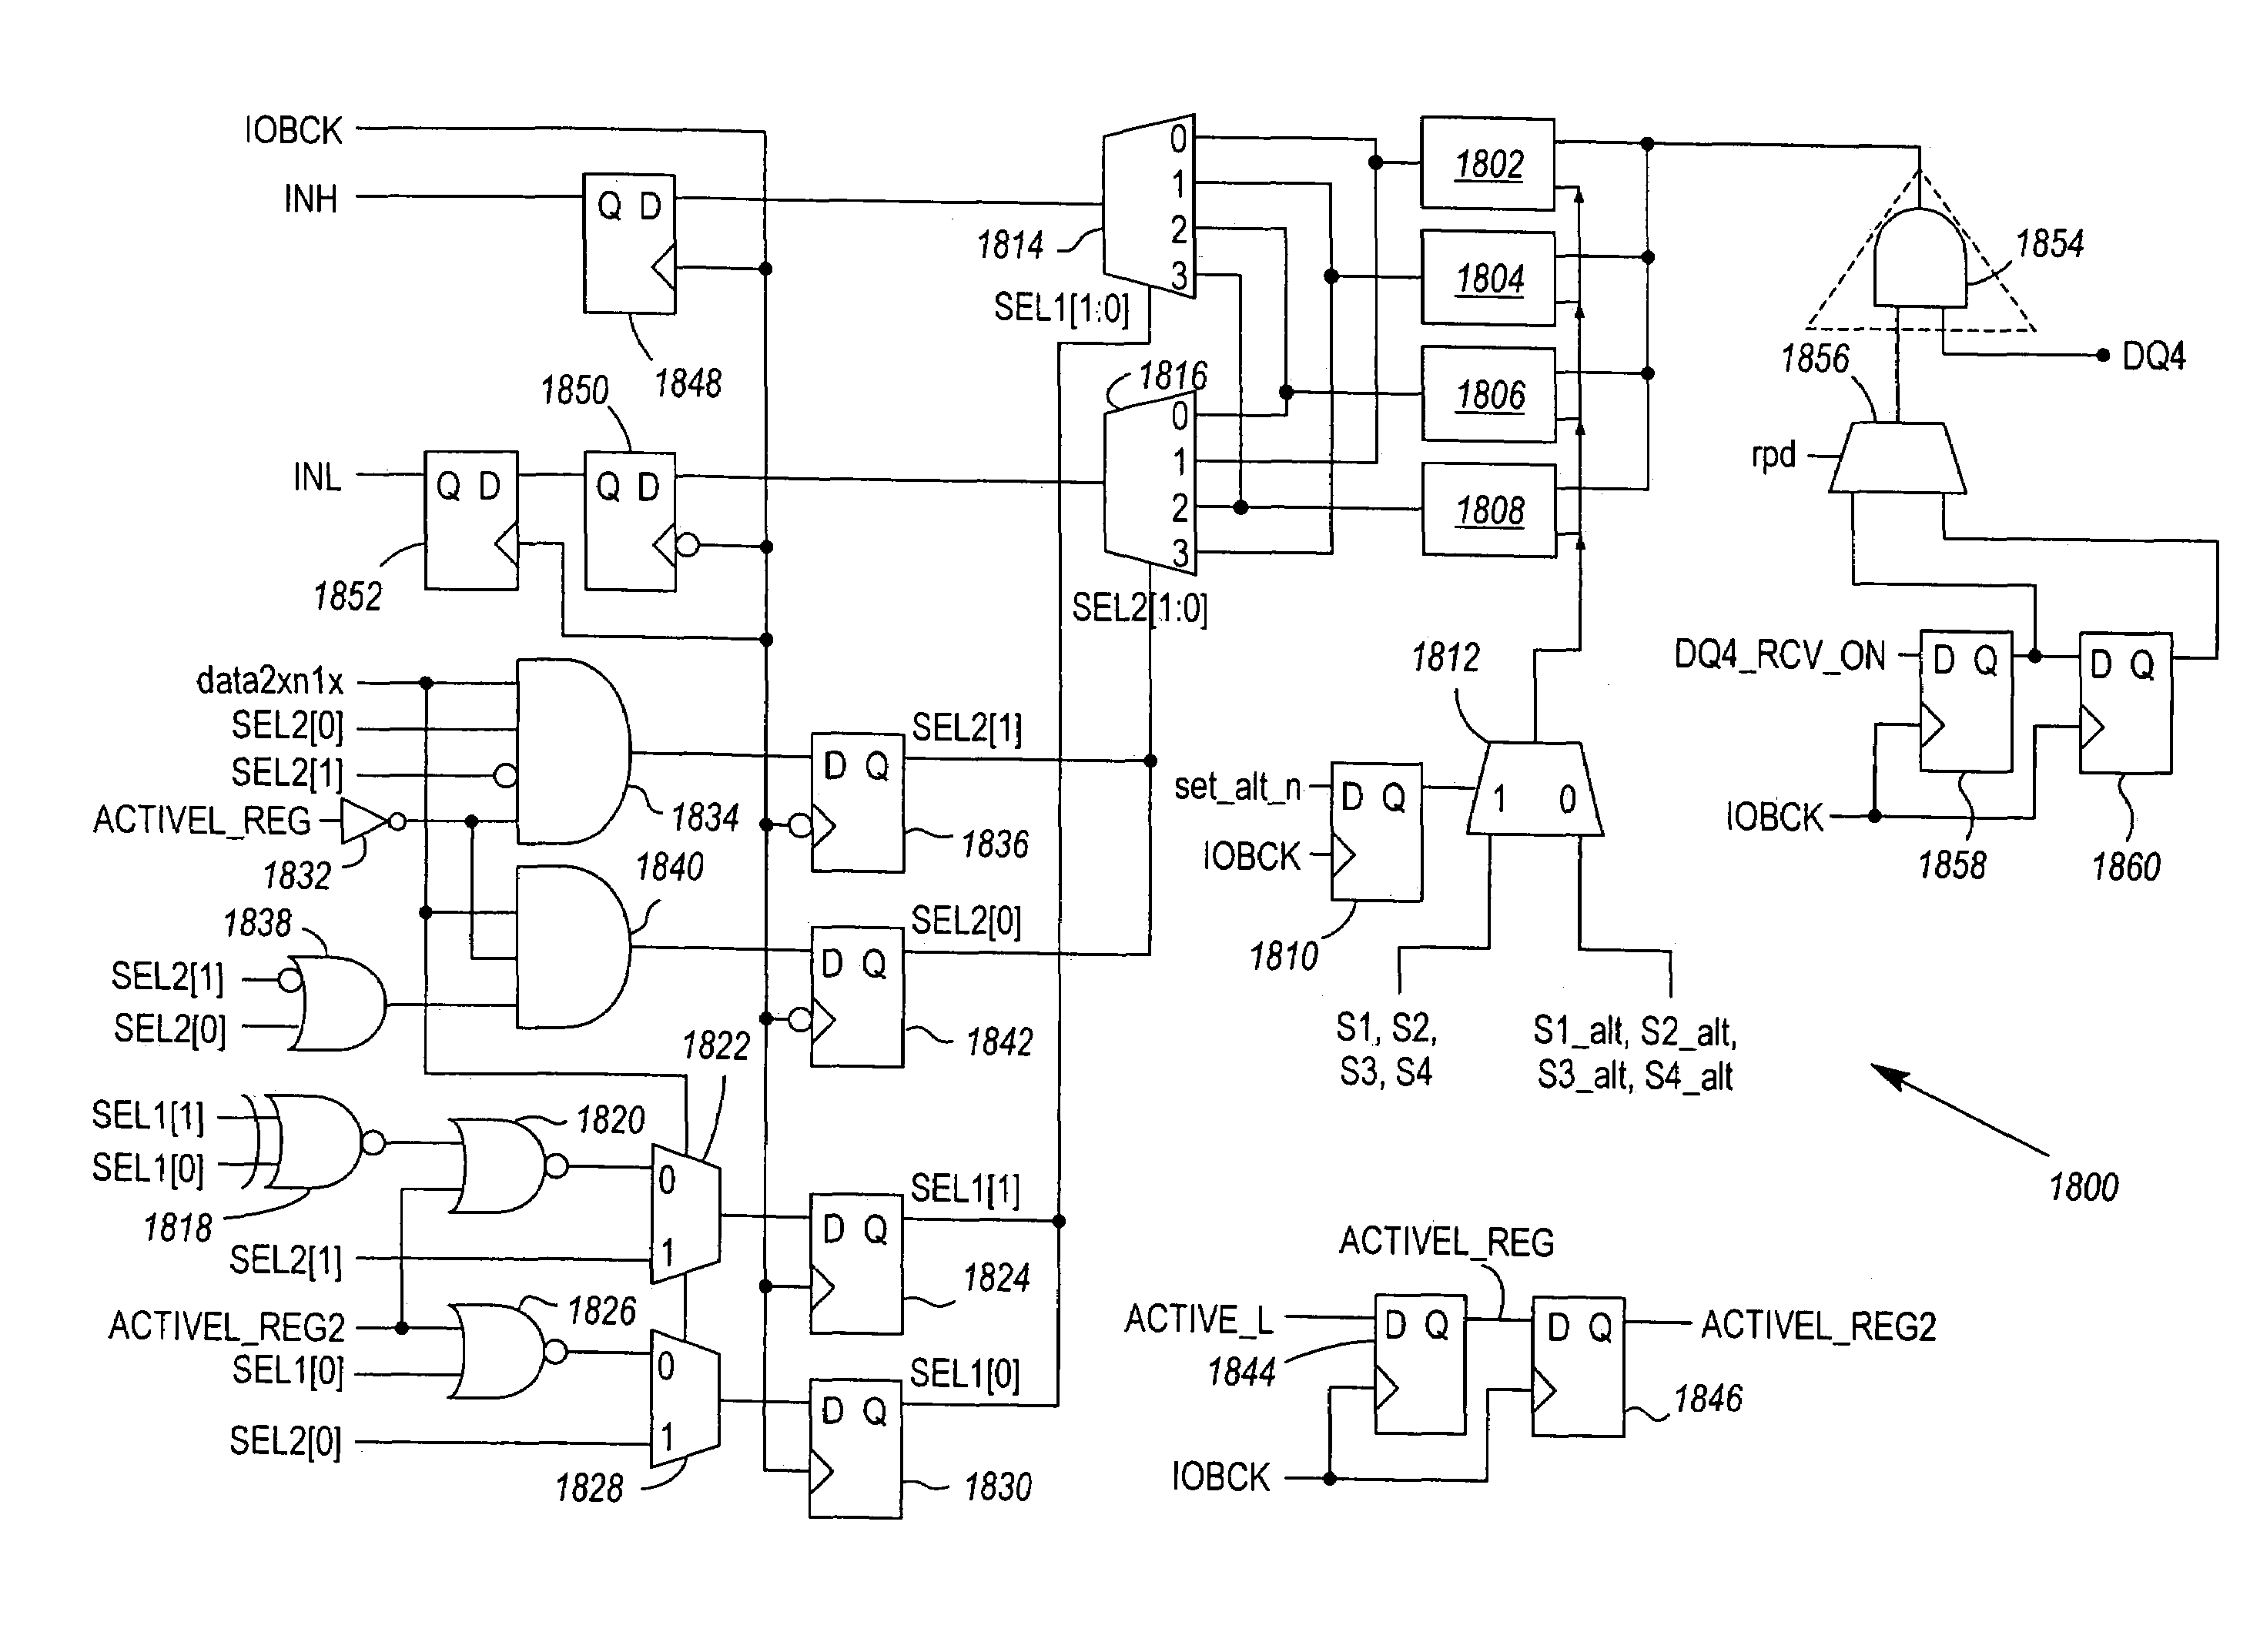 Memory controller having receiver circuitry capable of alternately generating one or more data streams as data is received at a data pad, in response to counts of strobe edges received at a strobe pad